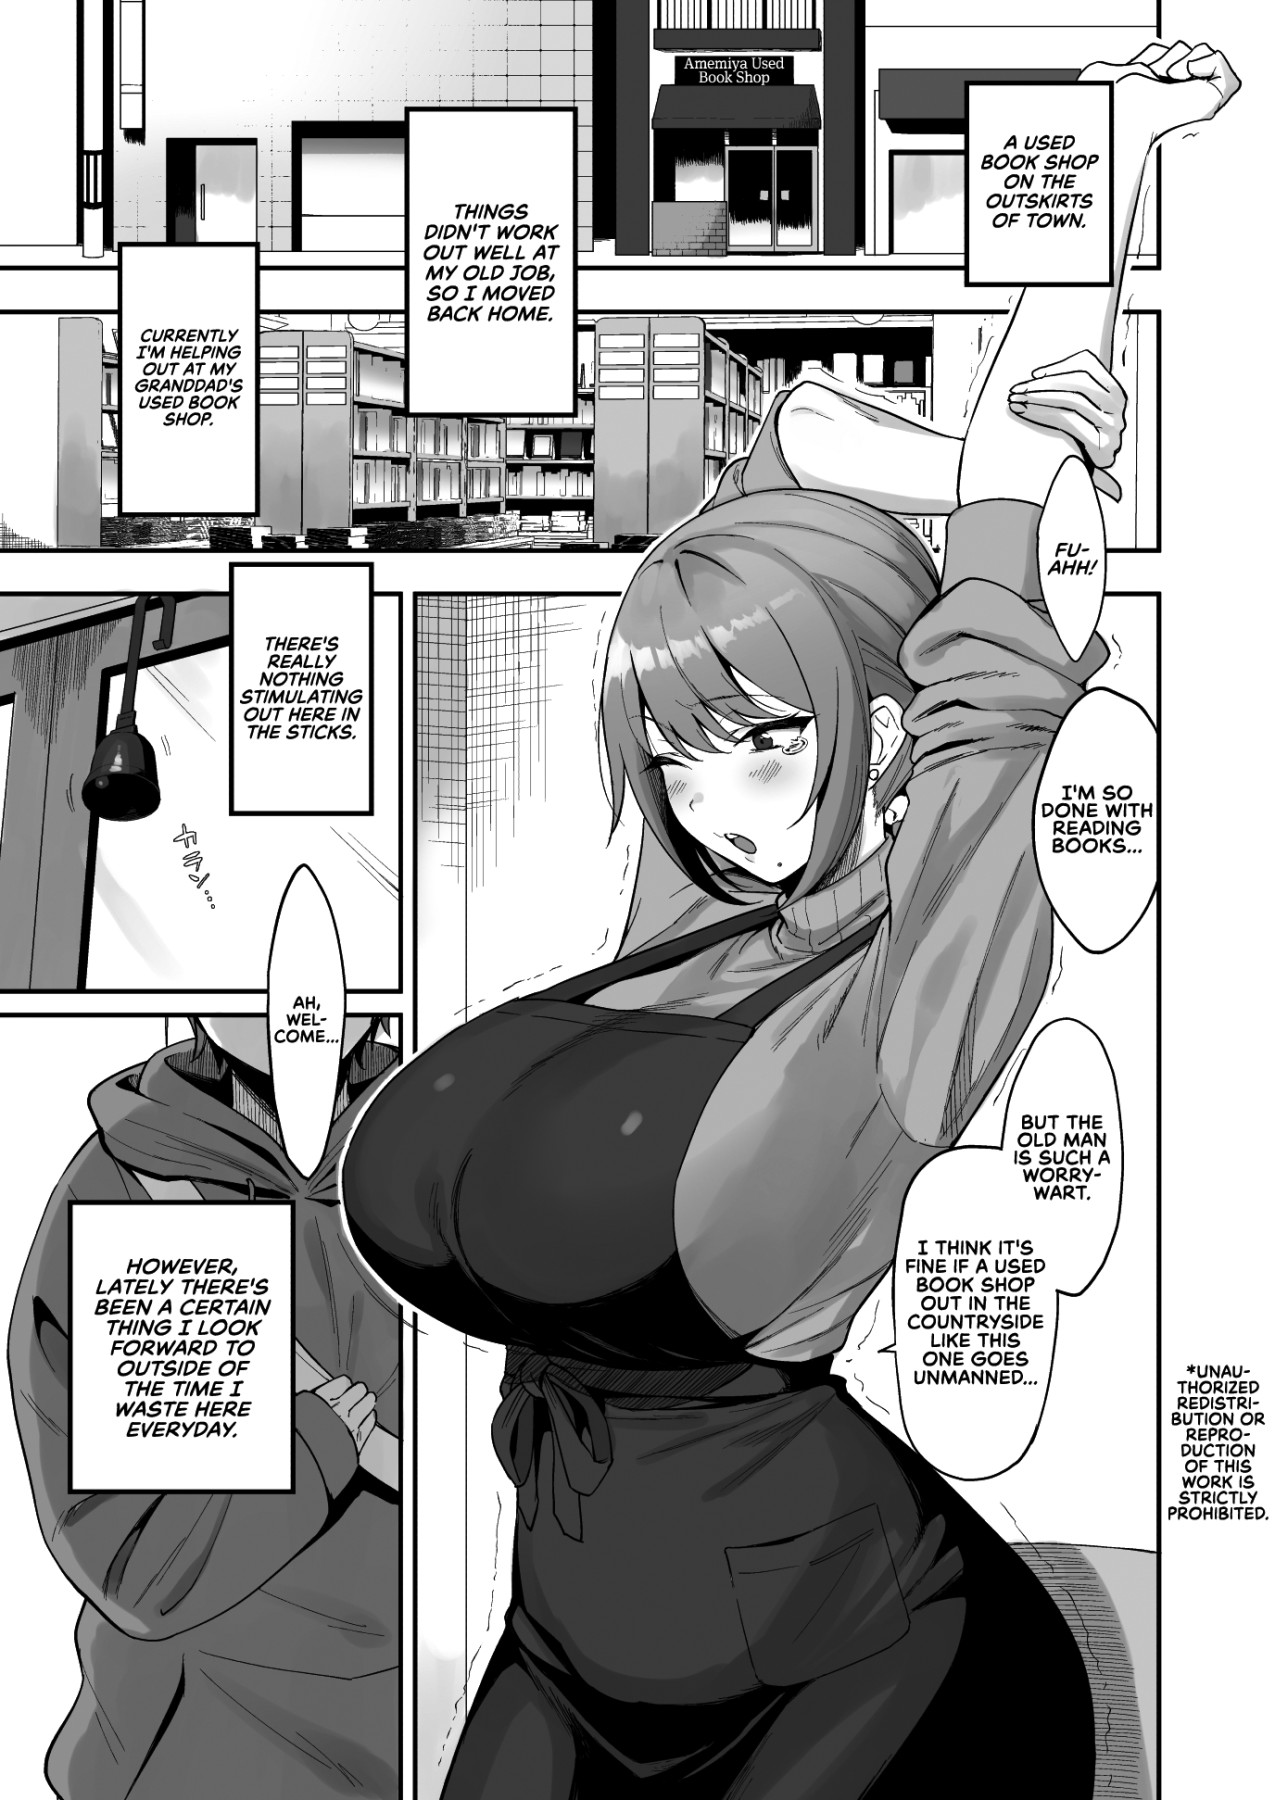 Hentai Manga Comic-With The Lady From The Used Book Shop-Read-2